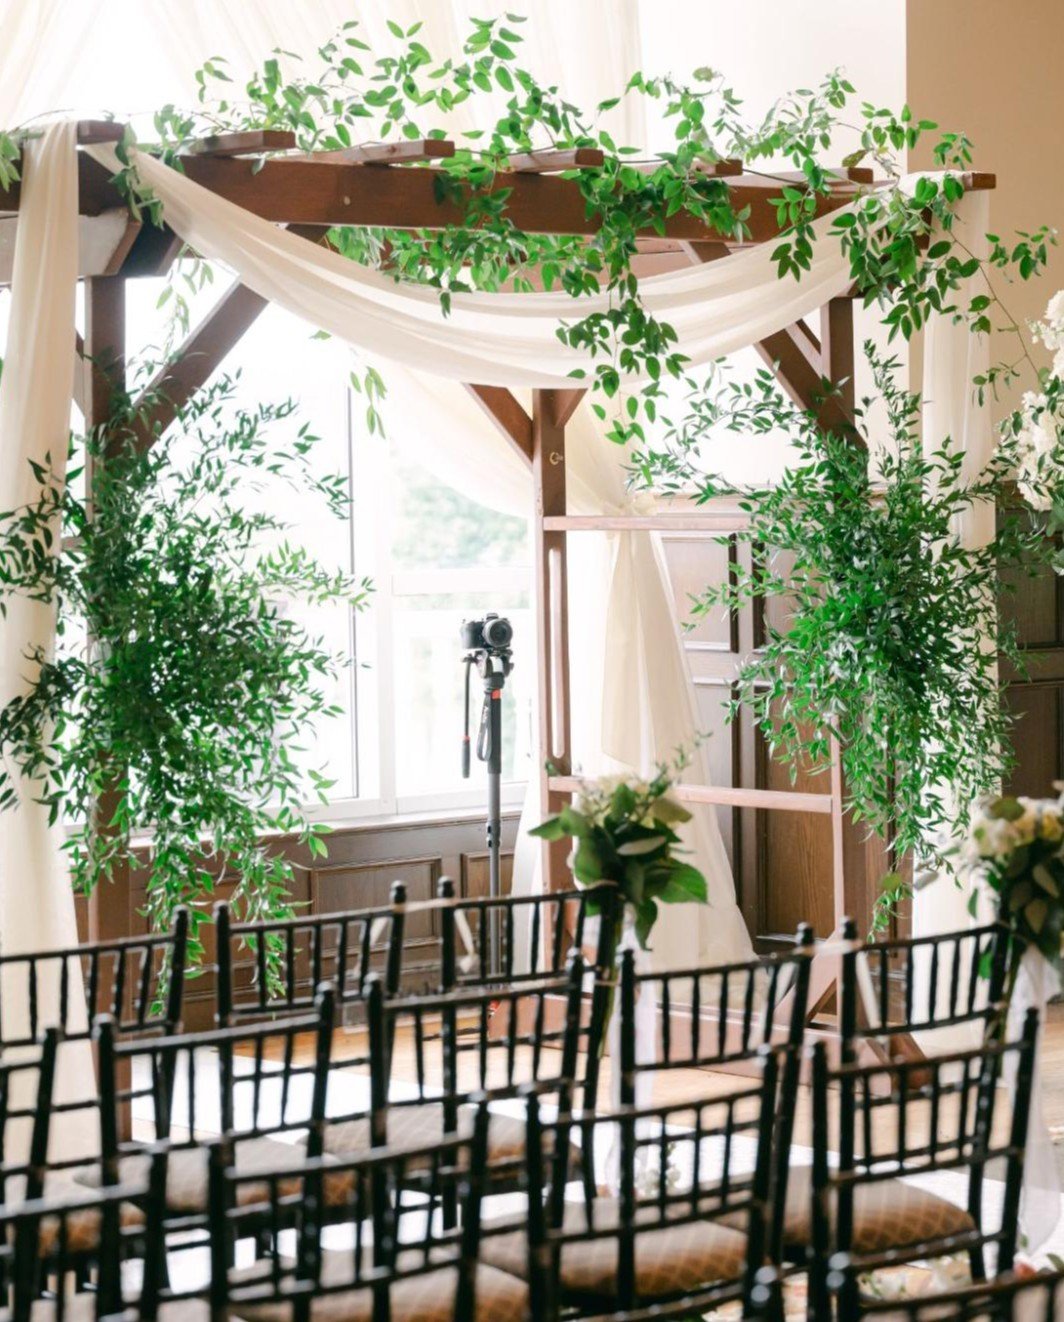 Our arch, adorned with lush greenery and elegant drapes, creates the perfect backdrop for saying 'I do.'

Let Total Events set the stage for your unforgettable day. Visit our website to inquire today!

Venue: @saratoganationalevents
Photo: @molli_pho